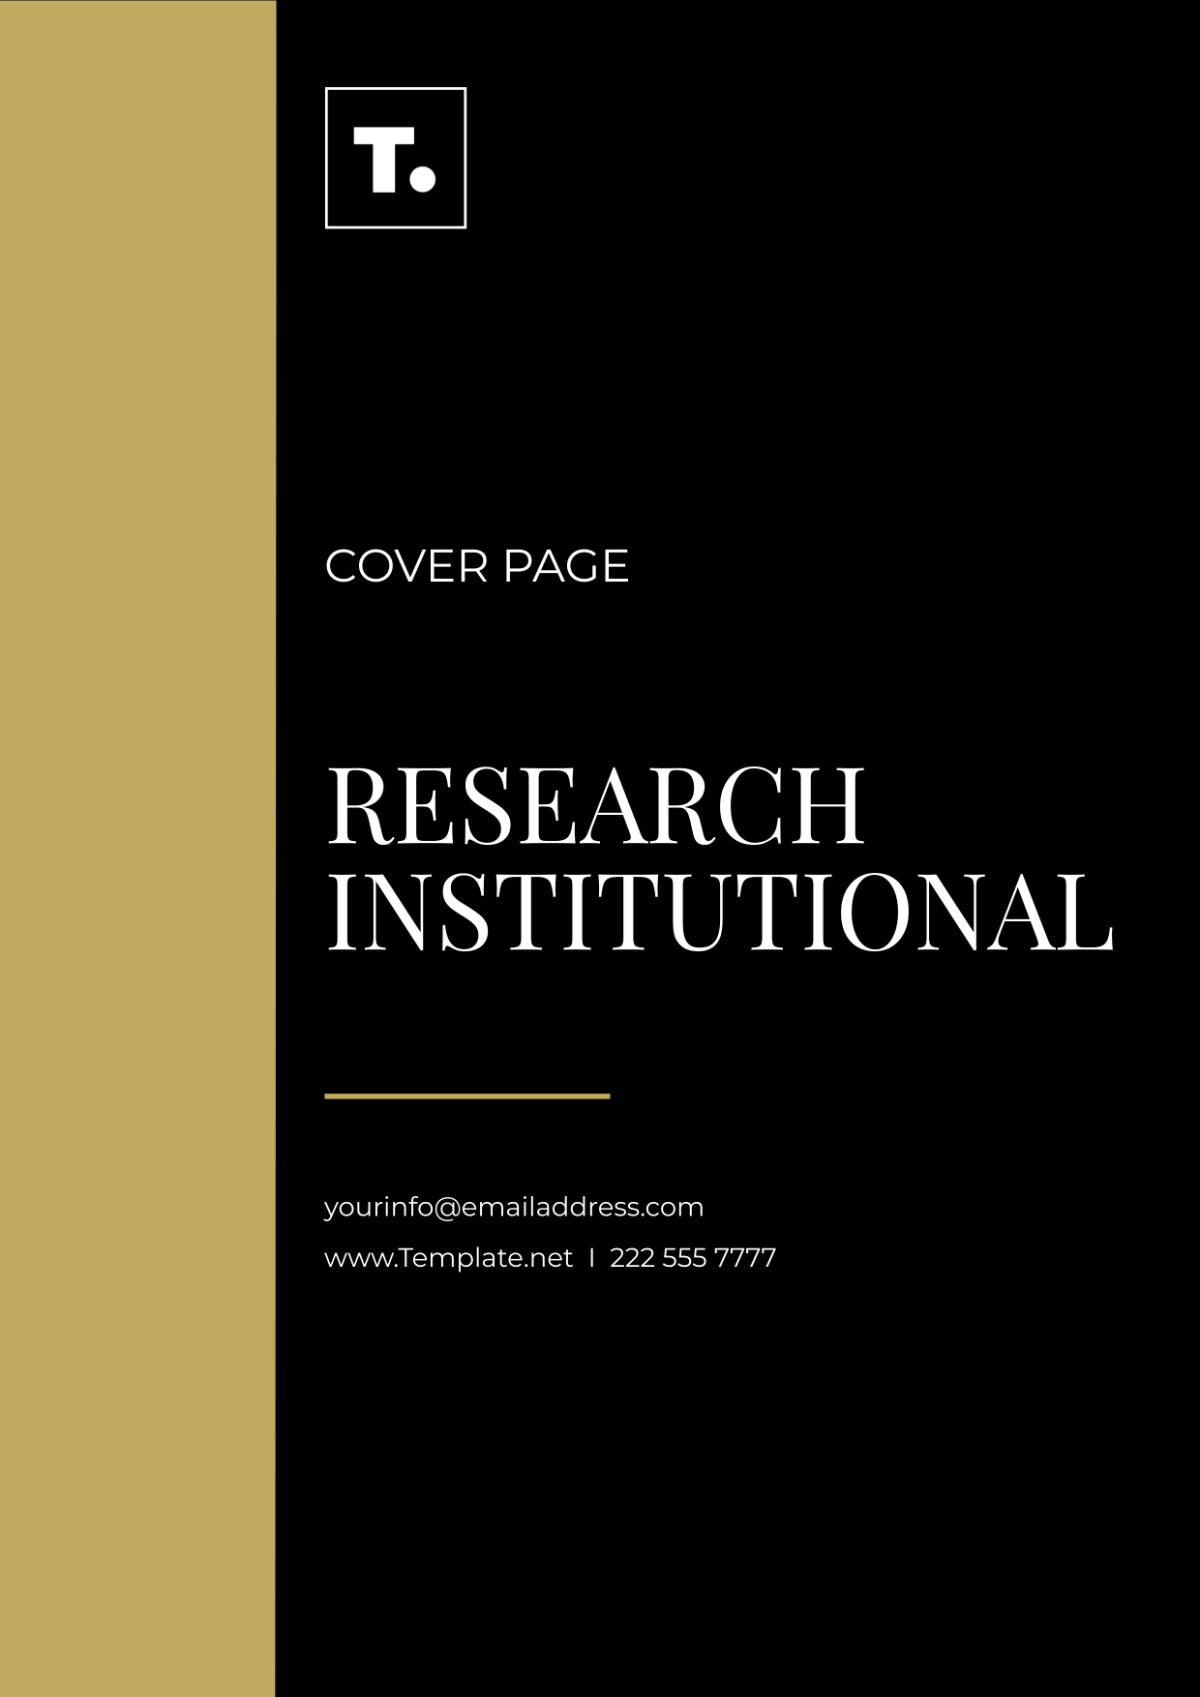 Research Institutional Cover Page Template